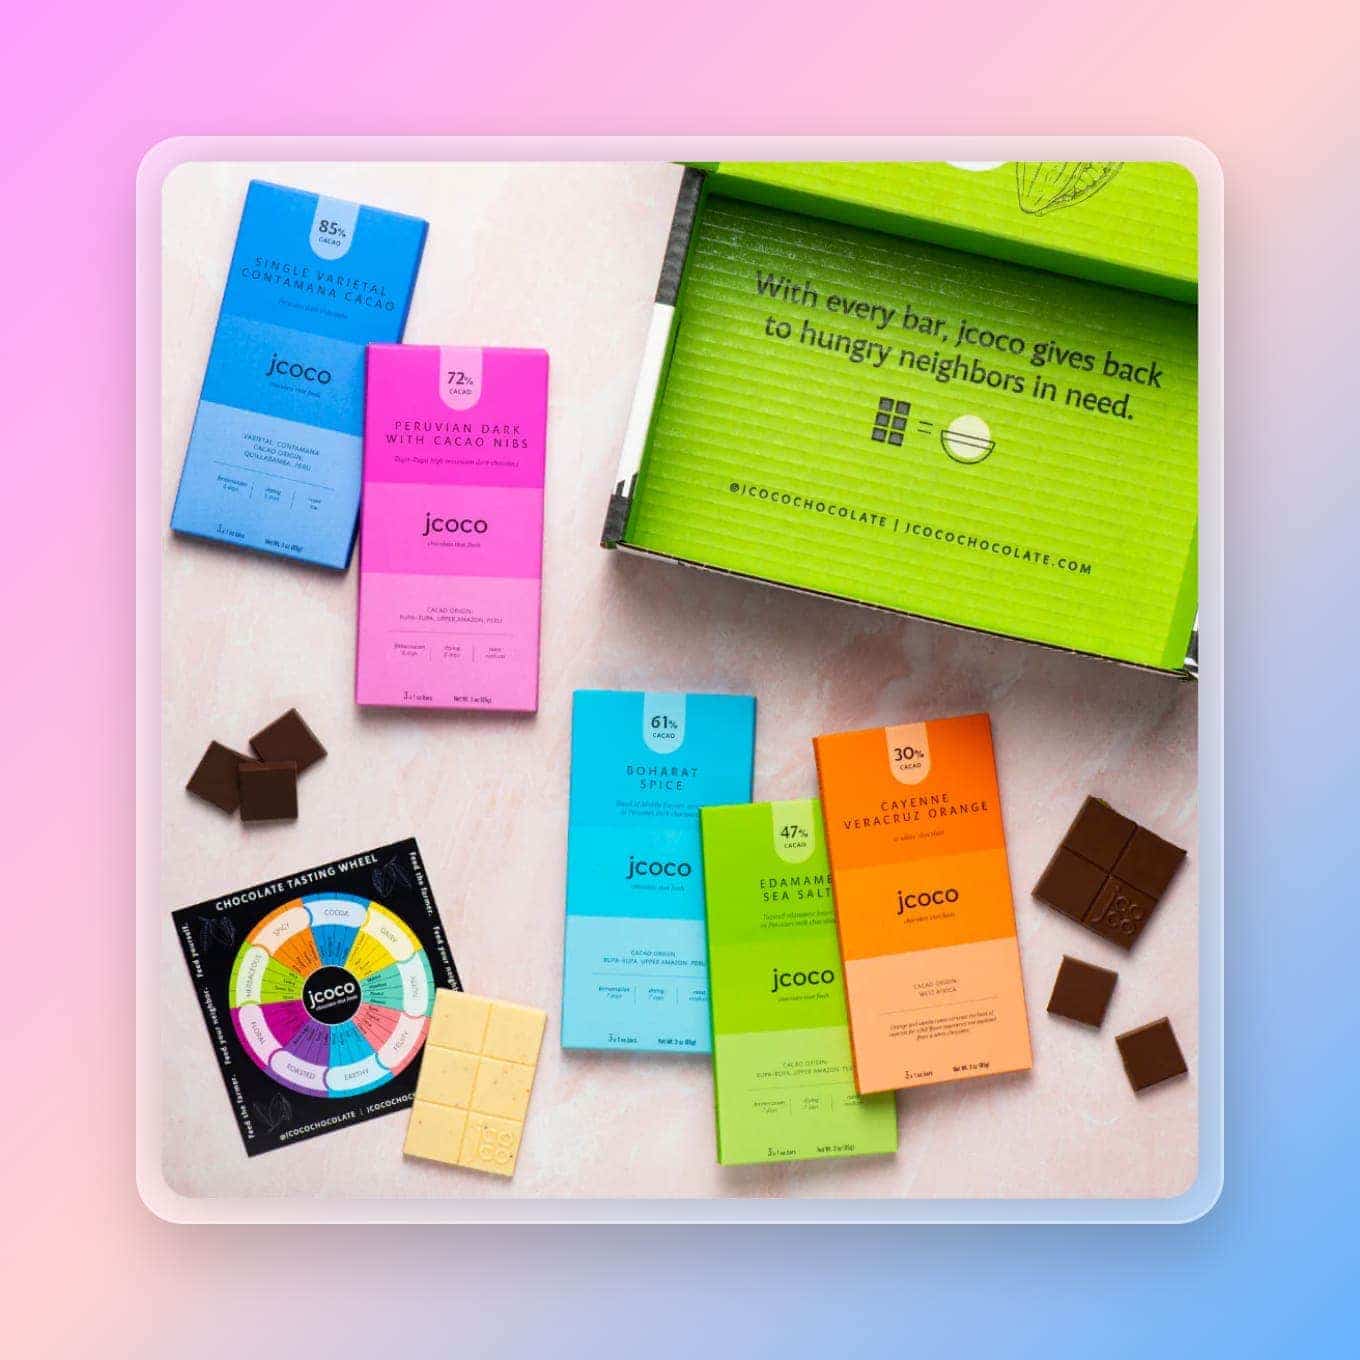 Box of chocolates that give back, with colorful packaging